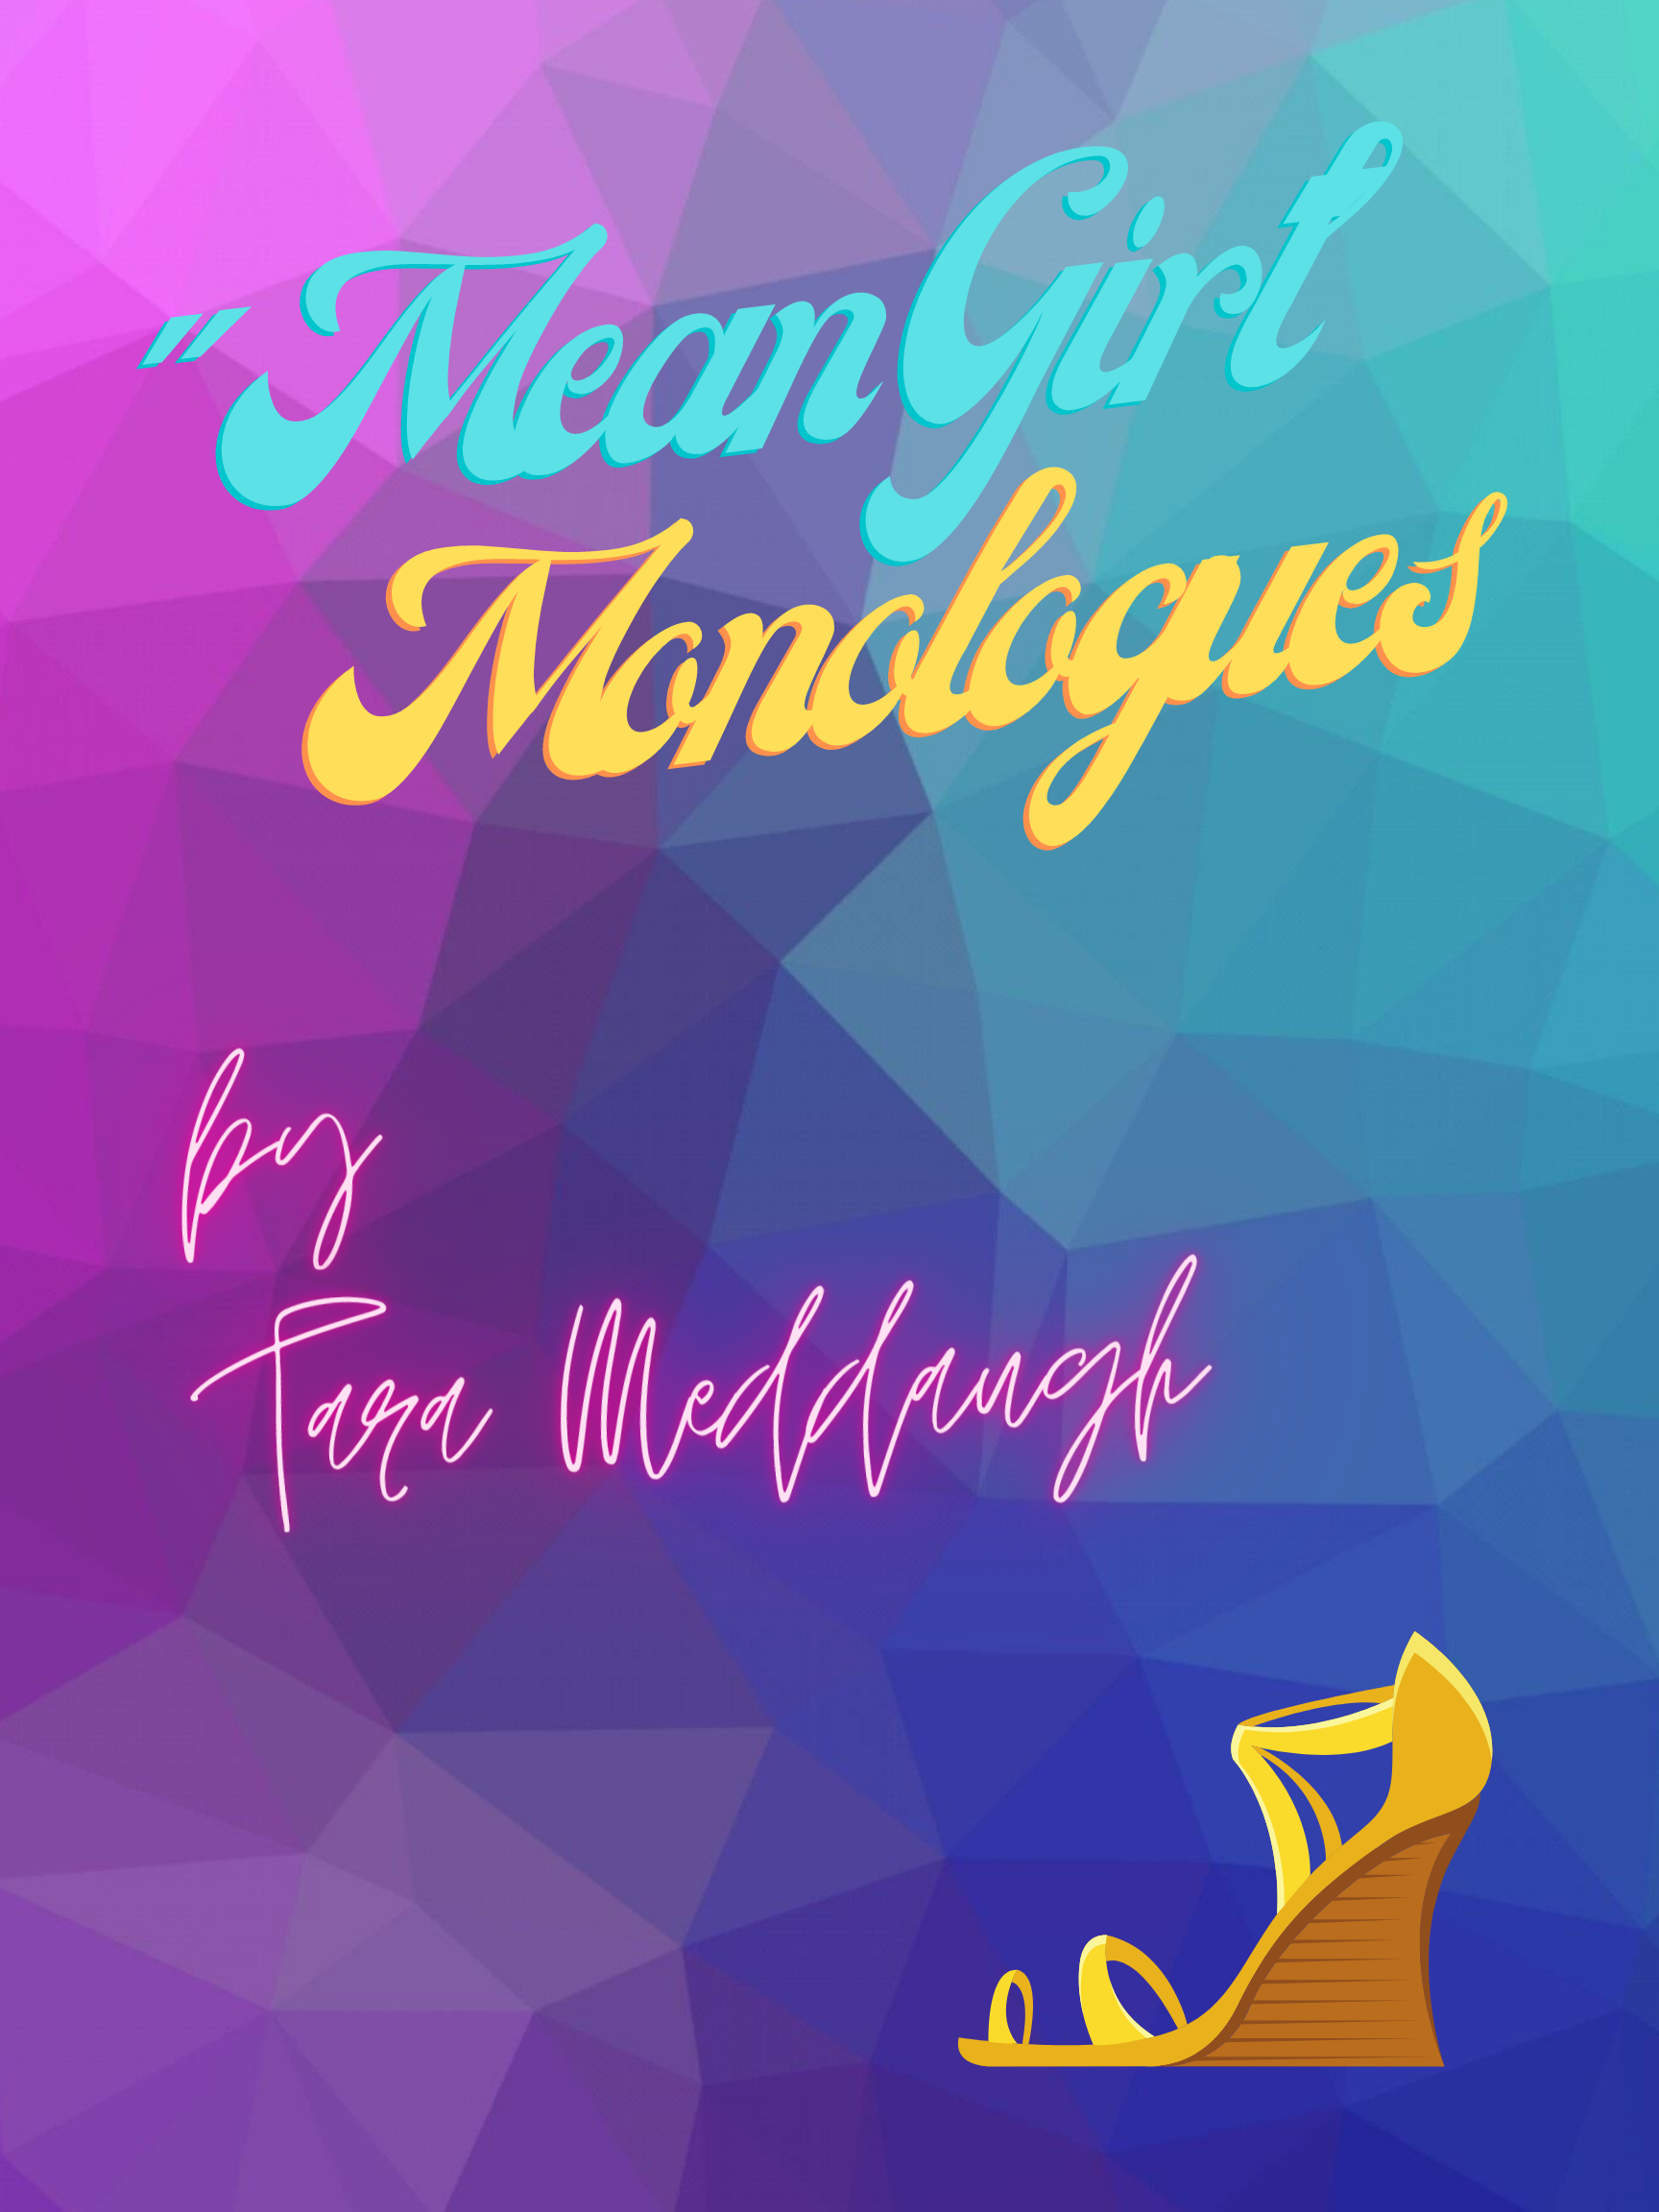 5 Great “Mean-Girl” monologues for teens: Comedy with a sharp edge! — Tara  Meddaugh